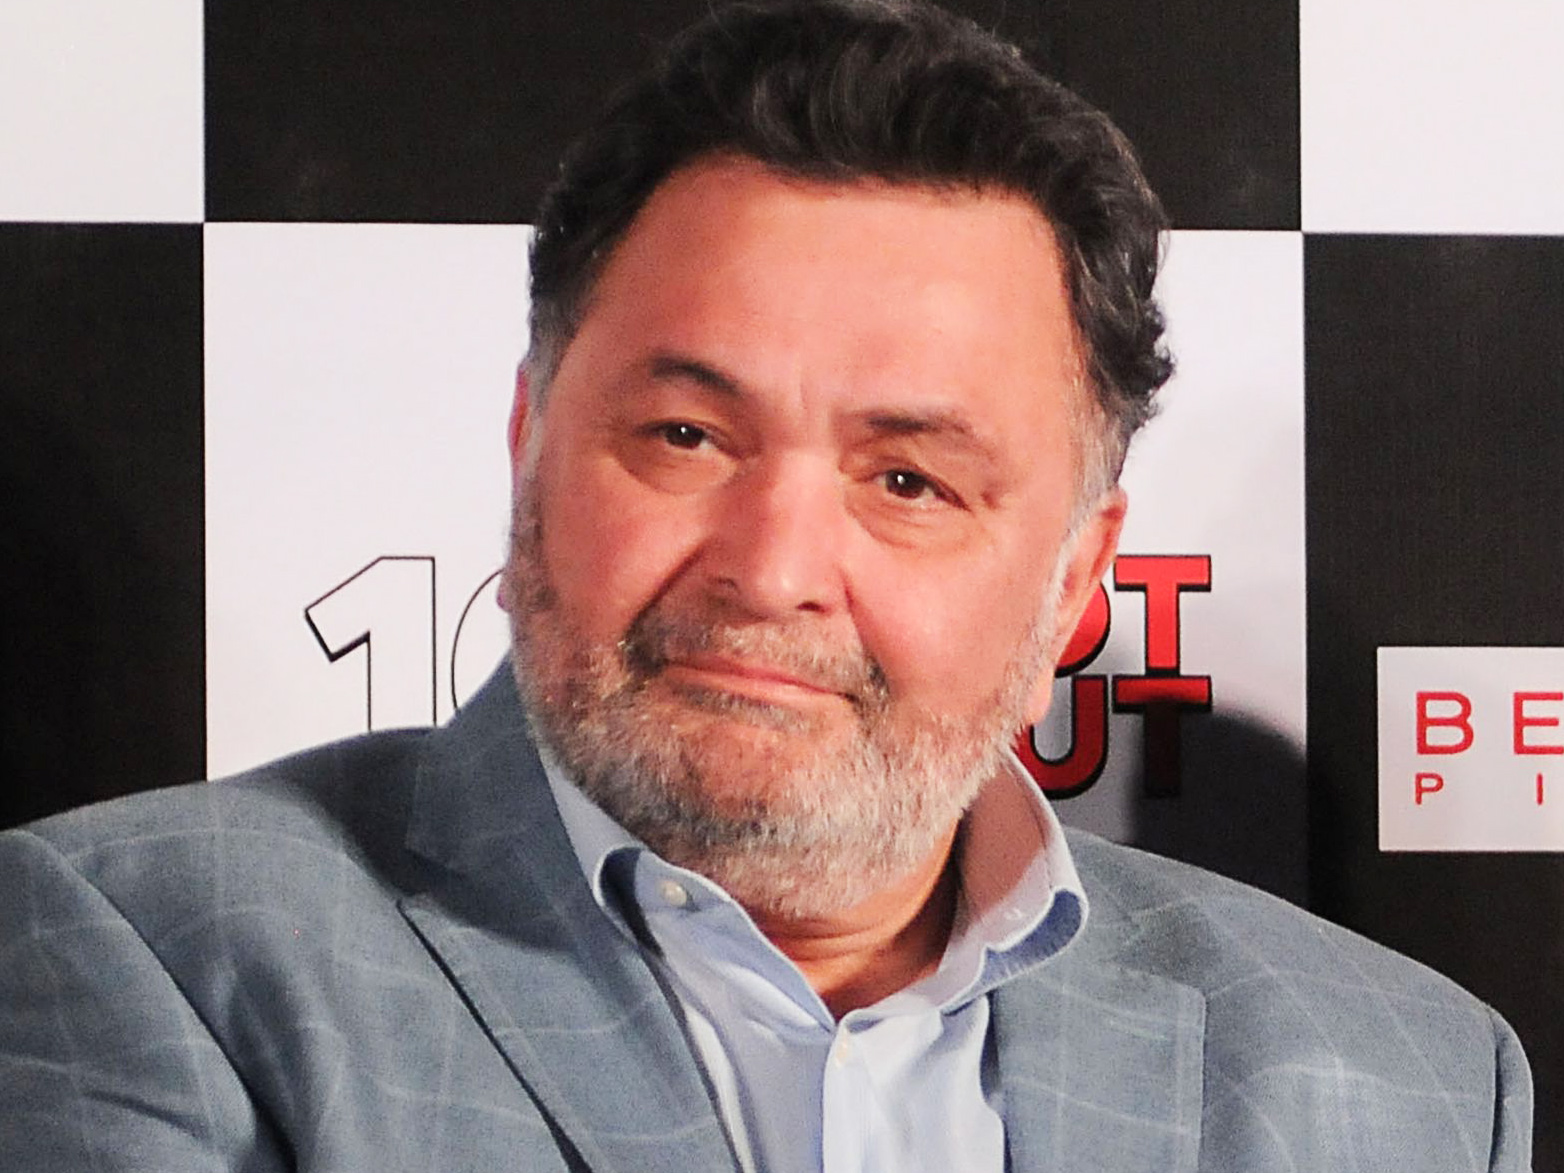 Throwback Tuesday: When Rishi Kapoor slammed Bollywood awards and called them trophies without merit